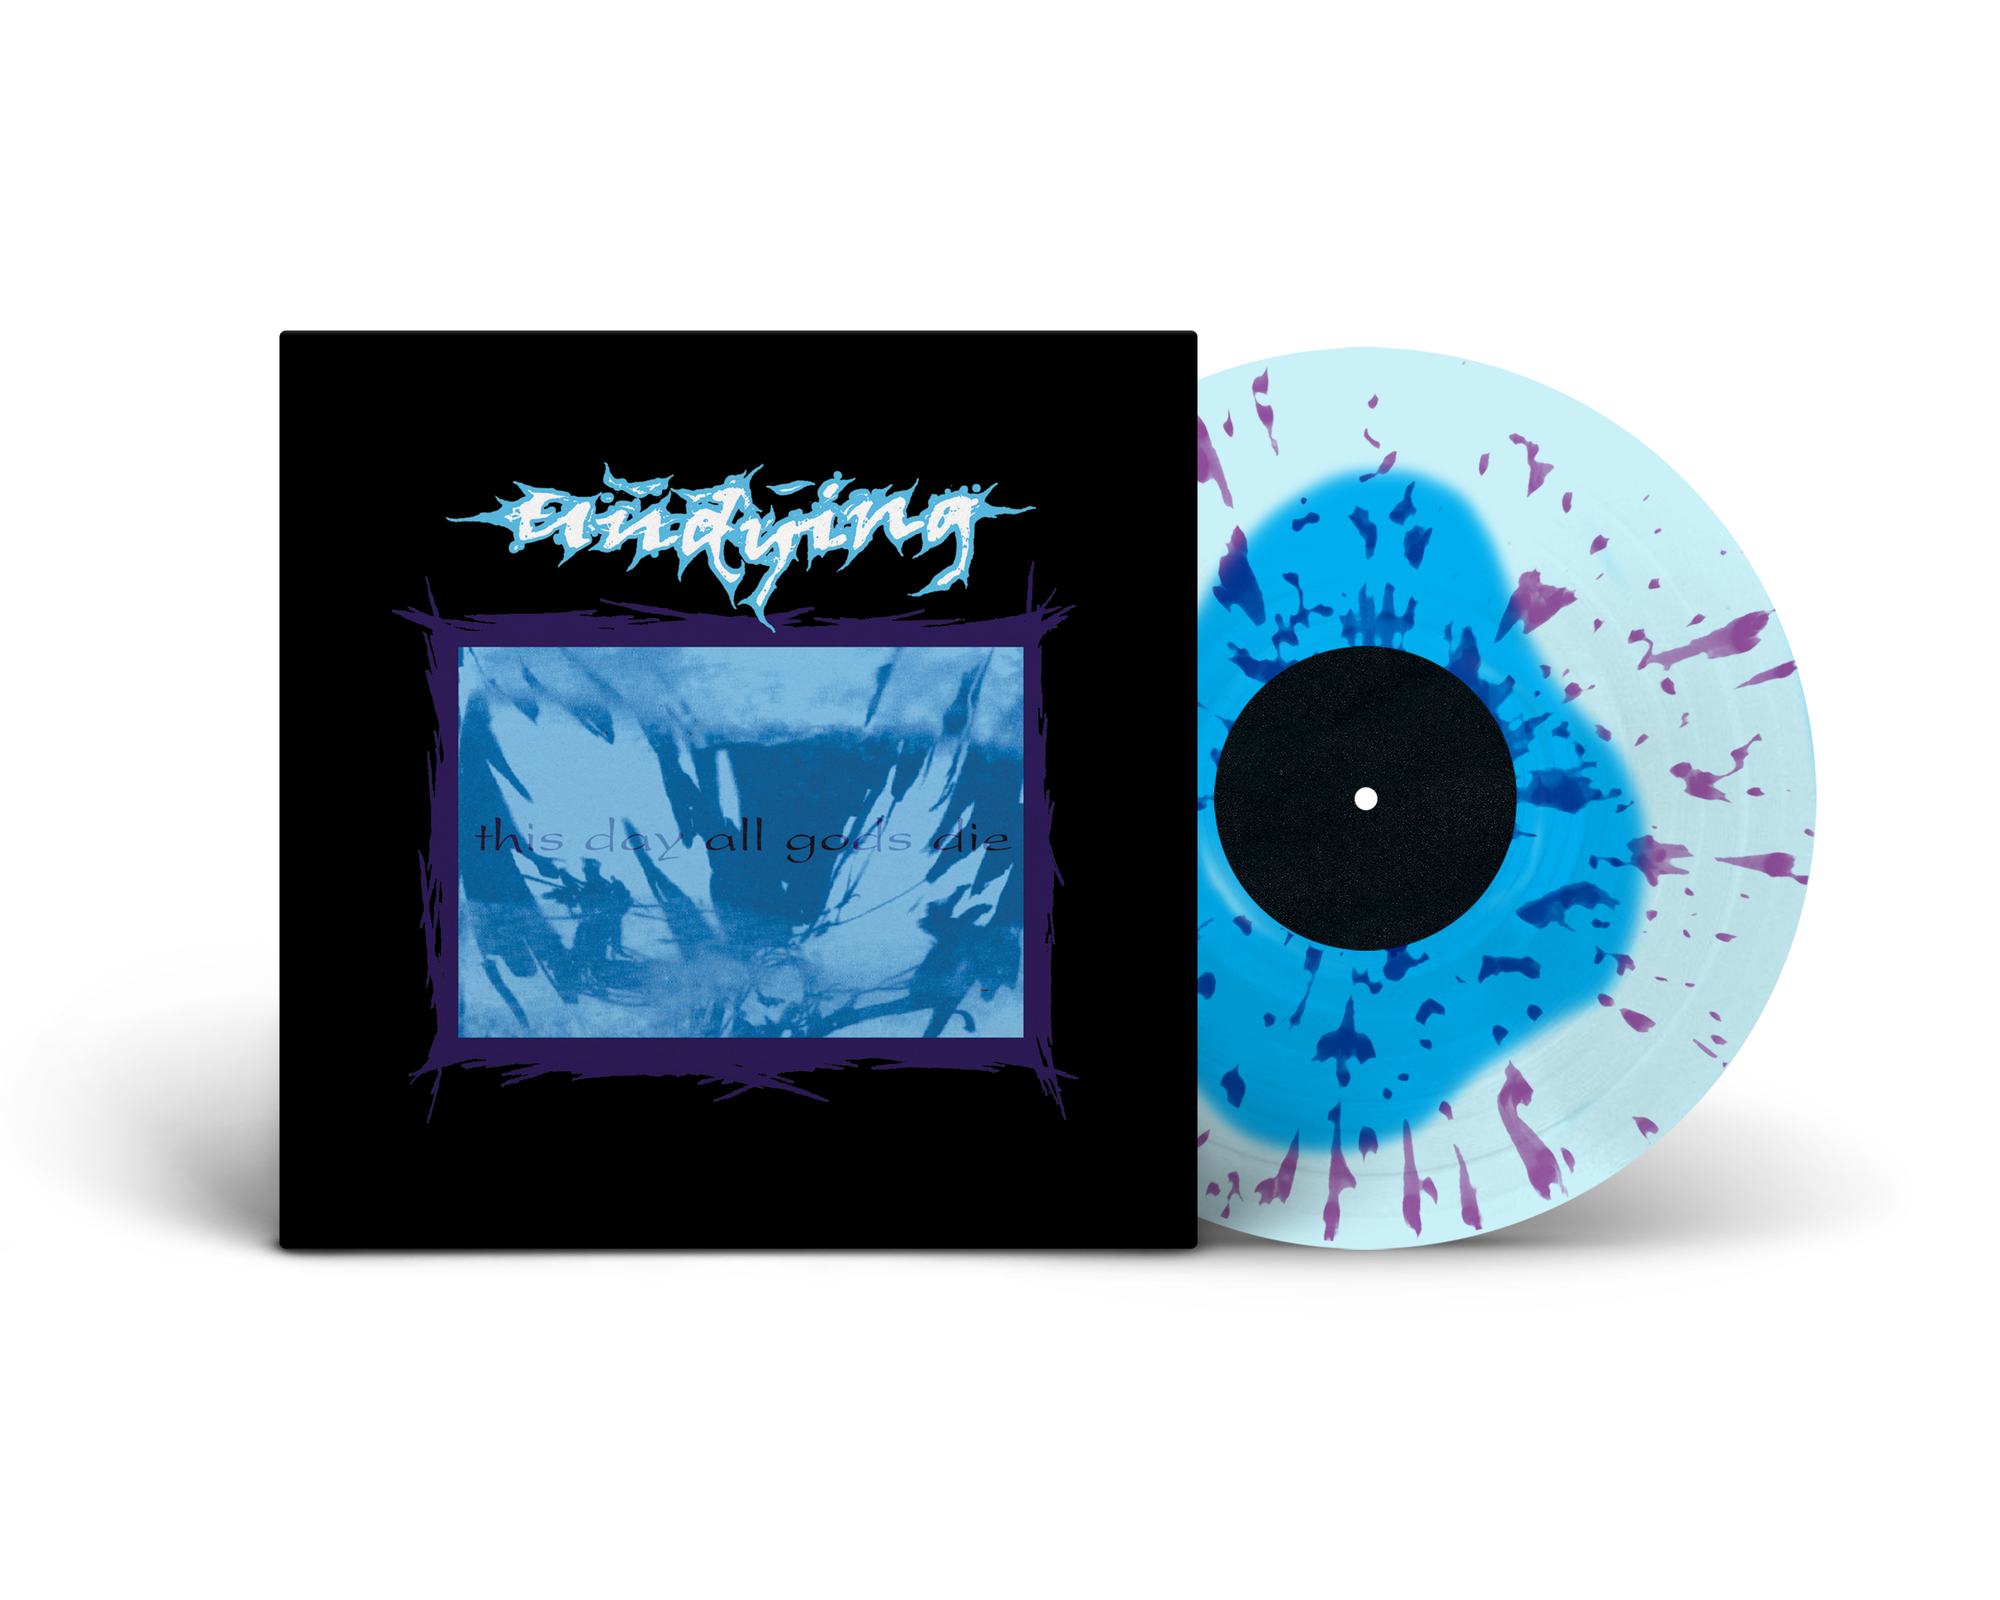 UNDYING "THIS DAY ALL GODS DIE" LP PREORDER